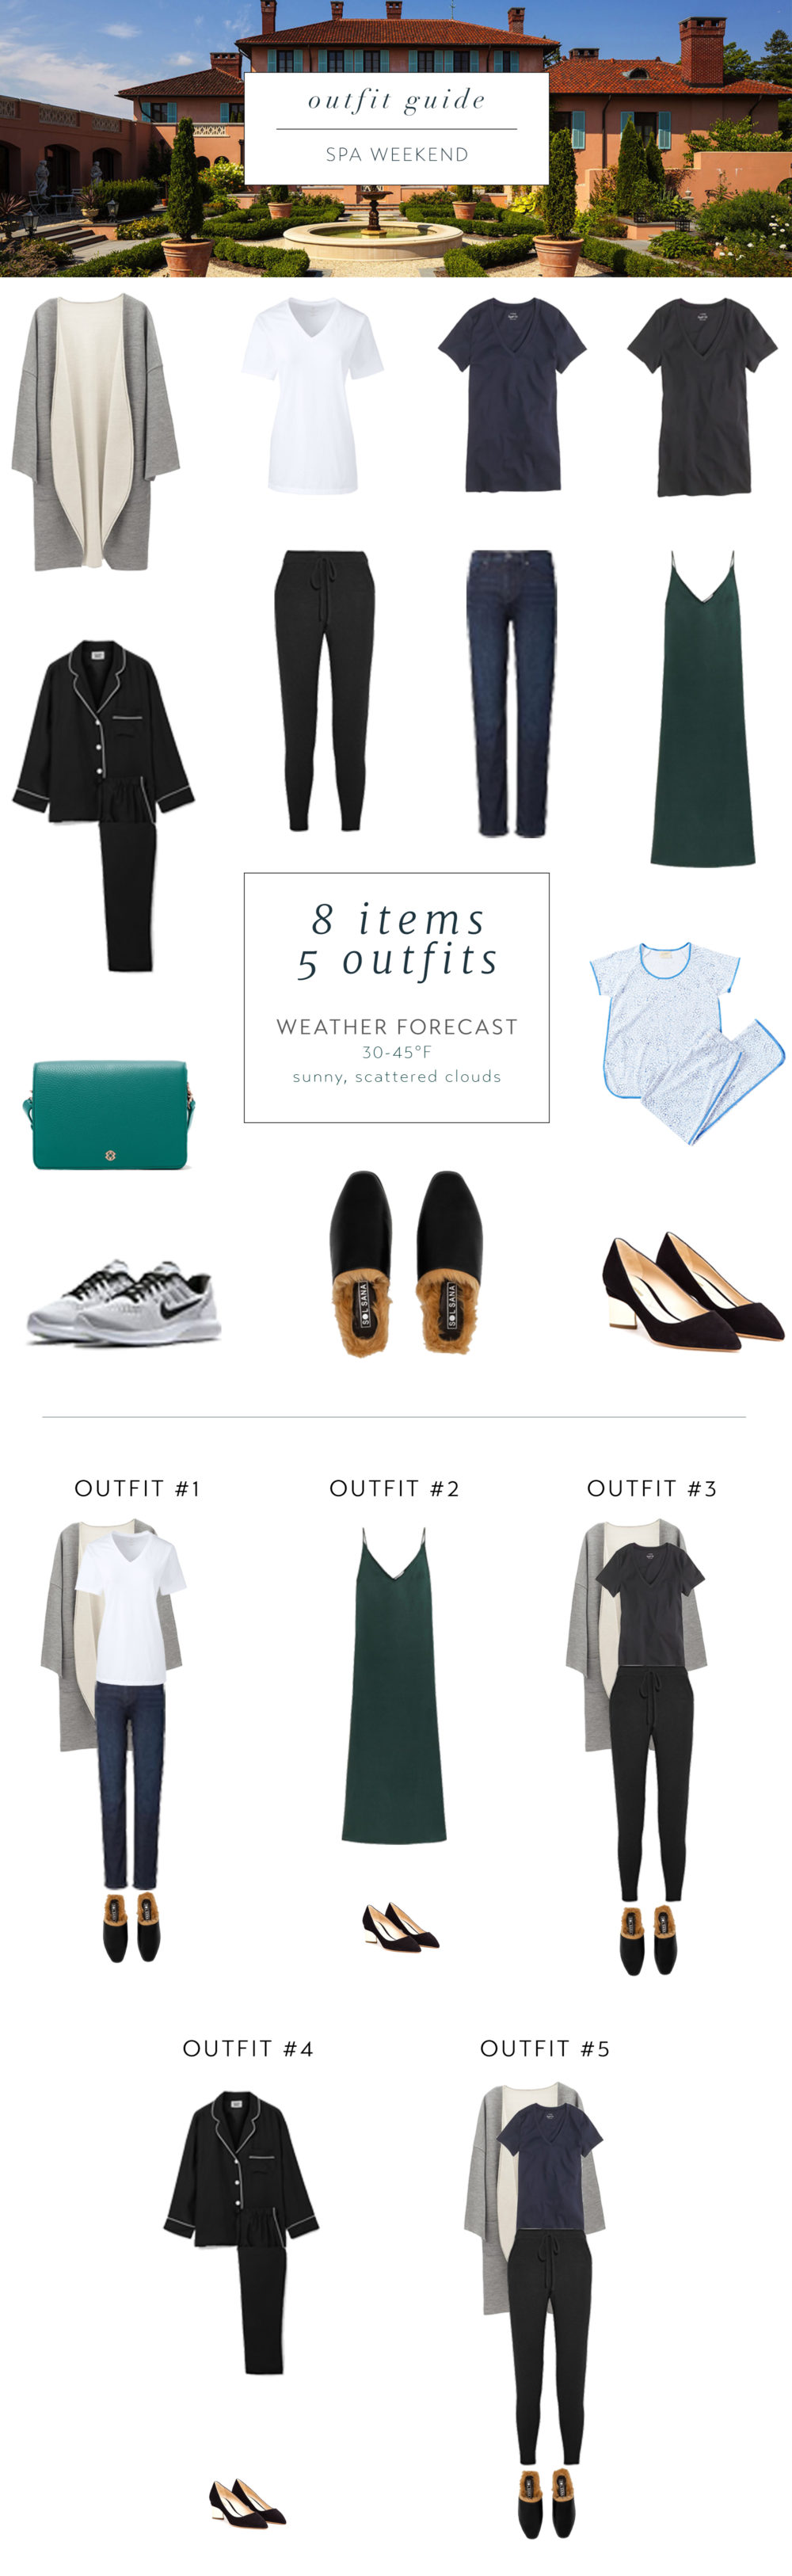 What to Wear on the Weekend